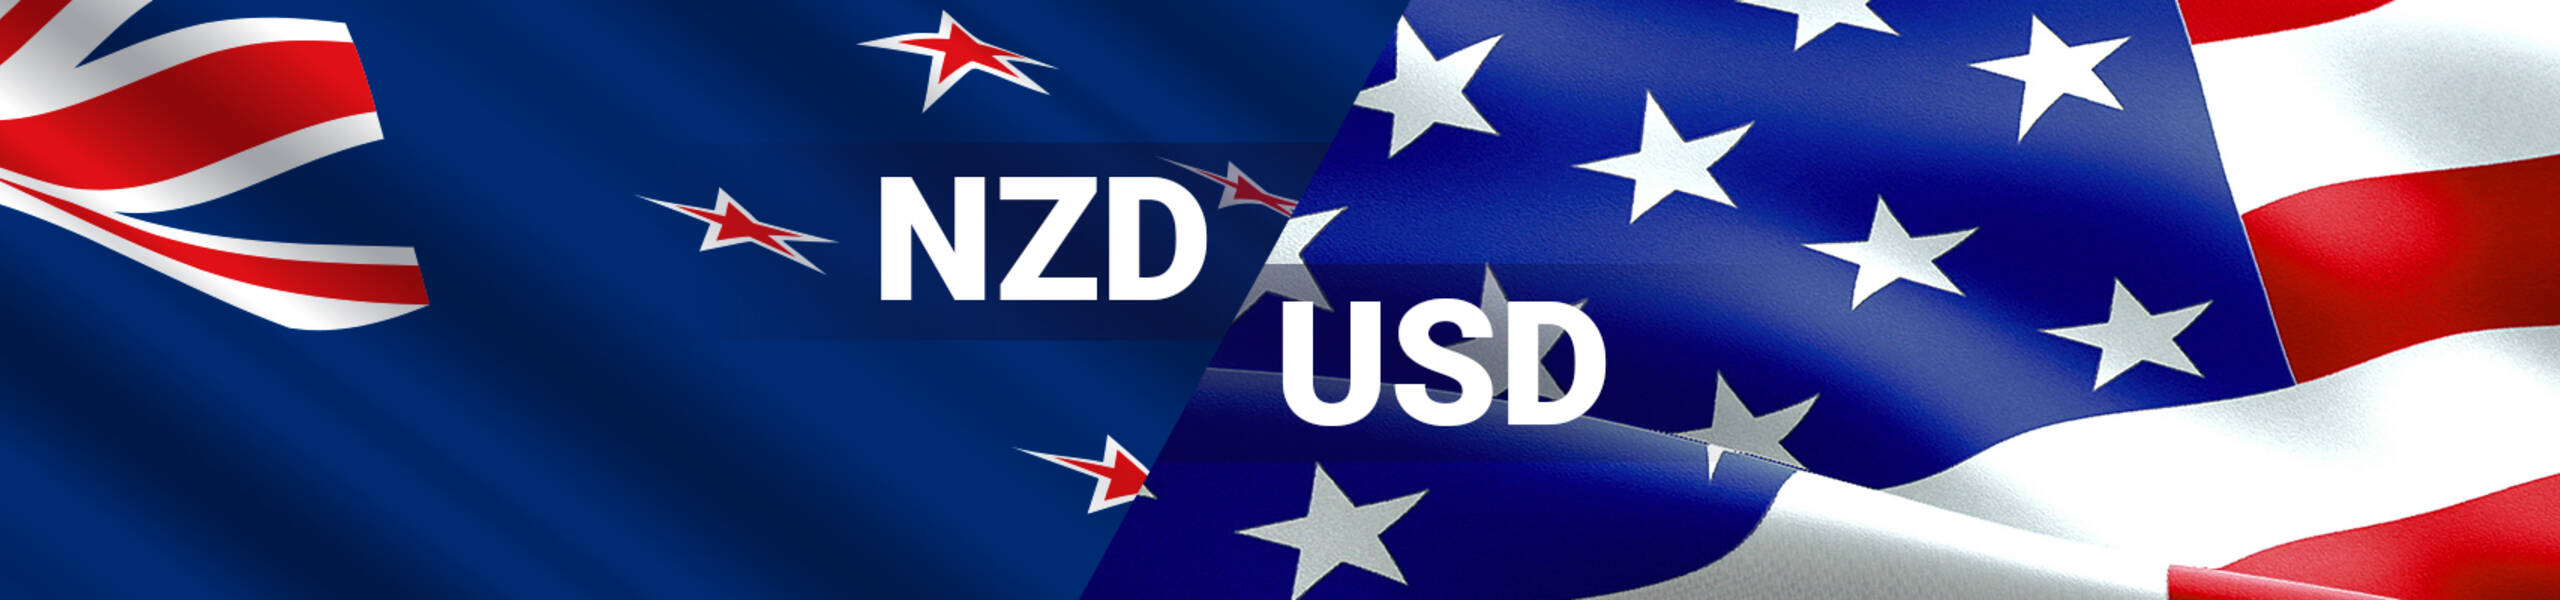 NZD/USD reached buy target 0.7130